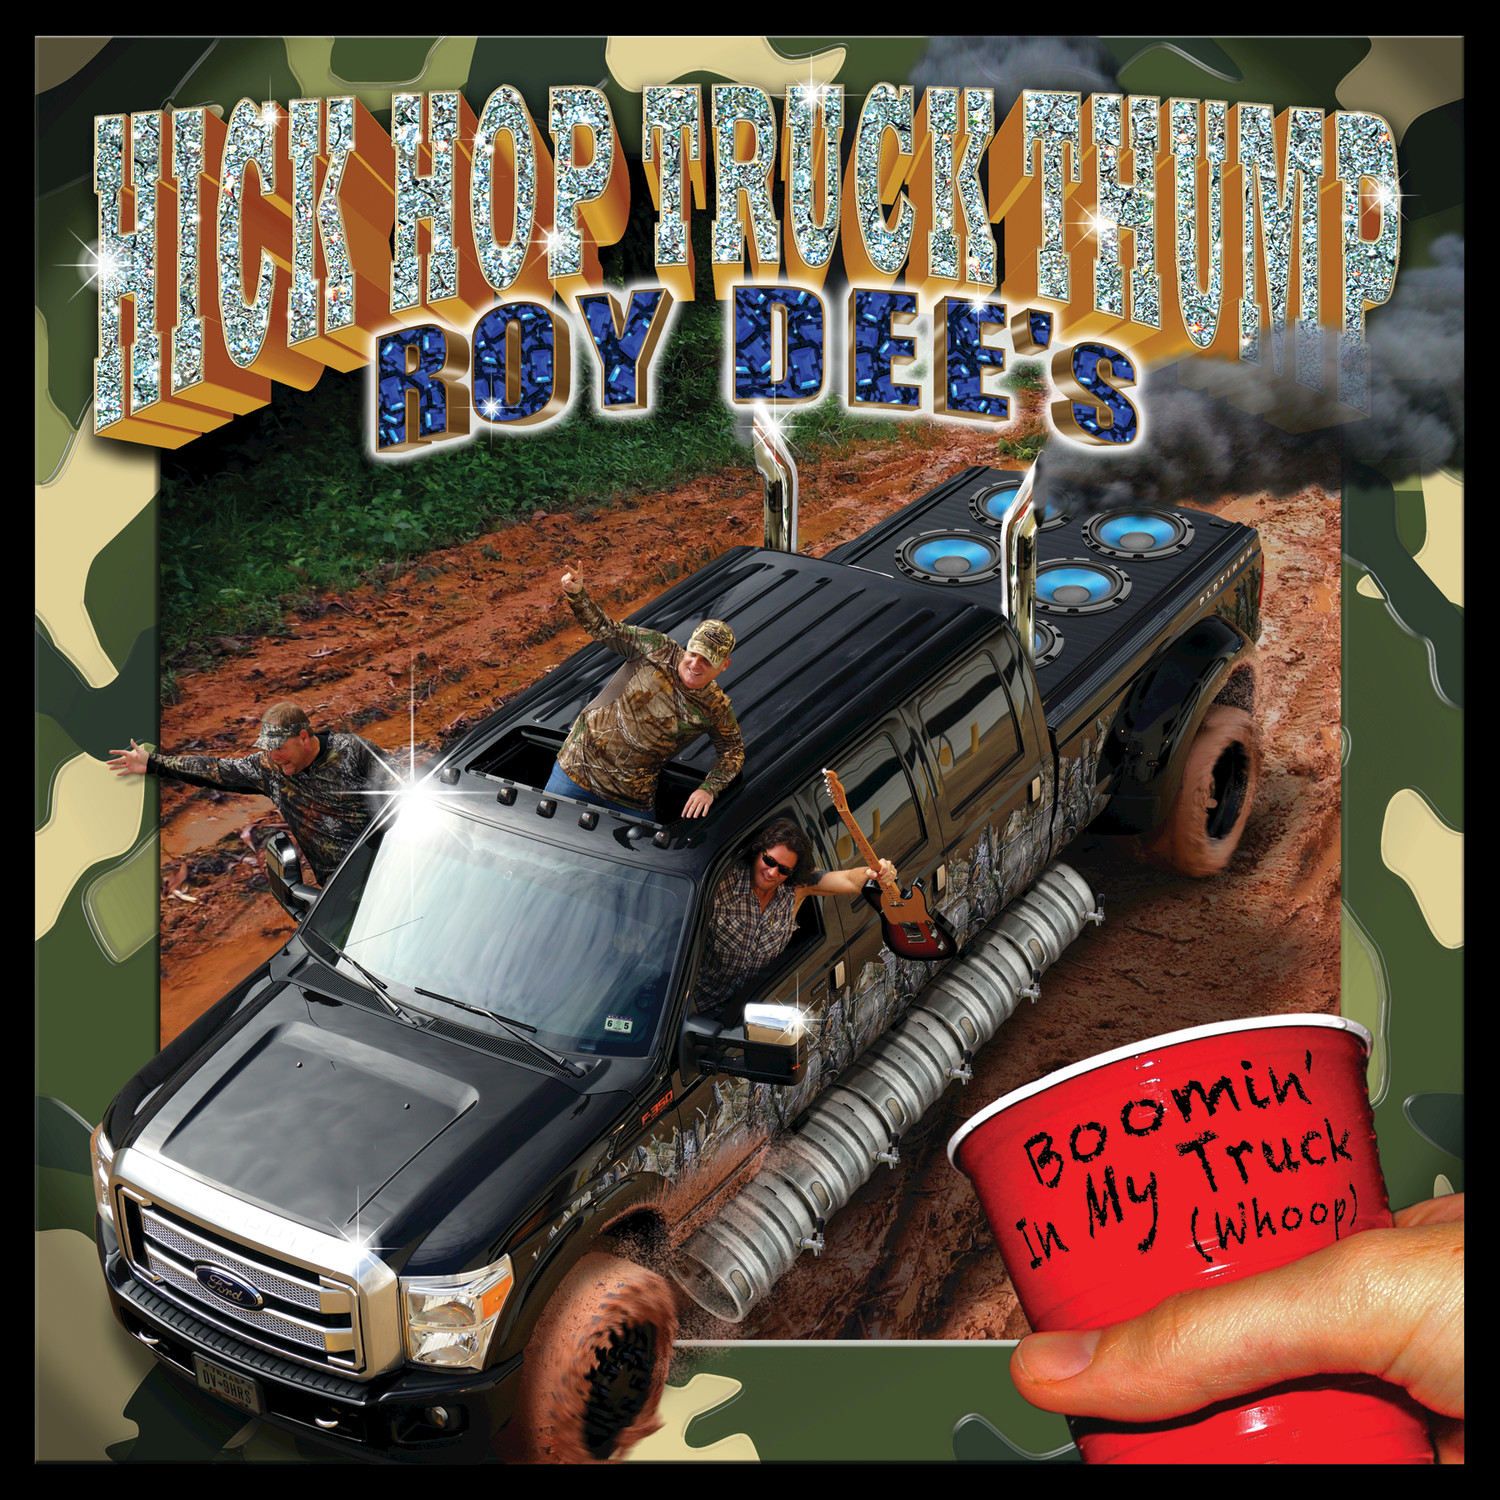 Boomin' In My Truck (Whoop) (Hick Hop Truck Thump)